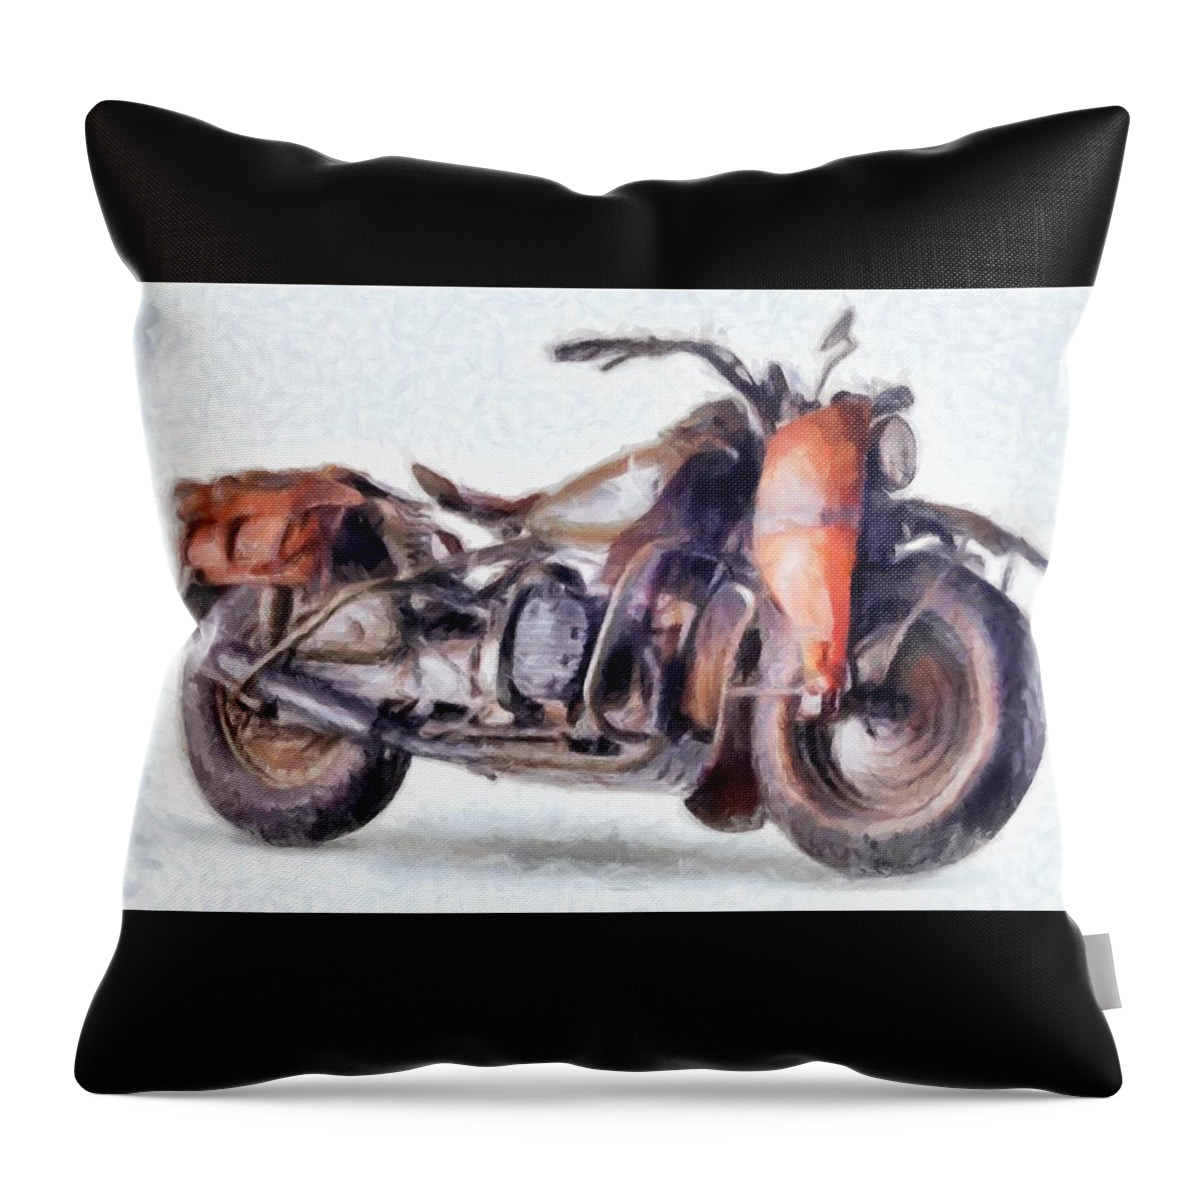 1942 Harley Davidson Throw Pillow featuring the digital art 1942 Harley Davidson, Military, 750cc by Caito Junqueira